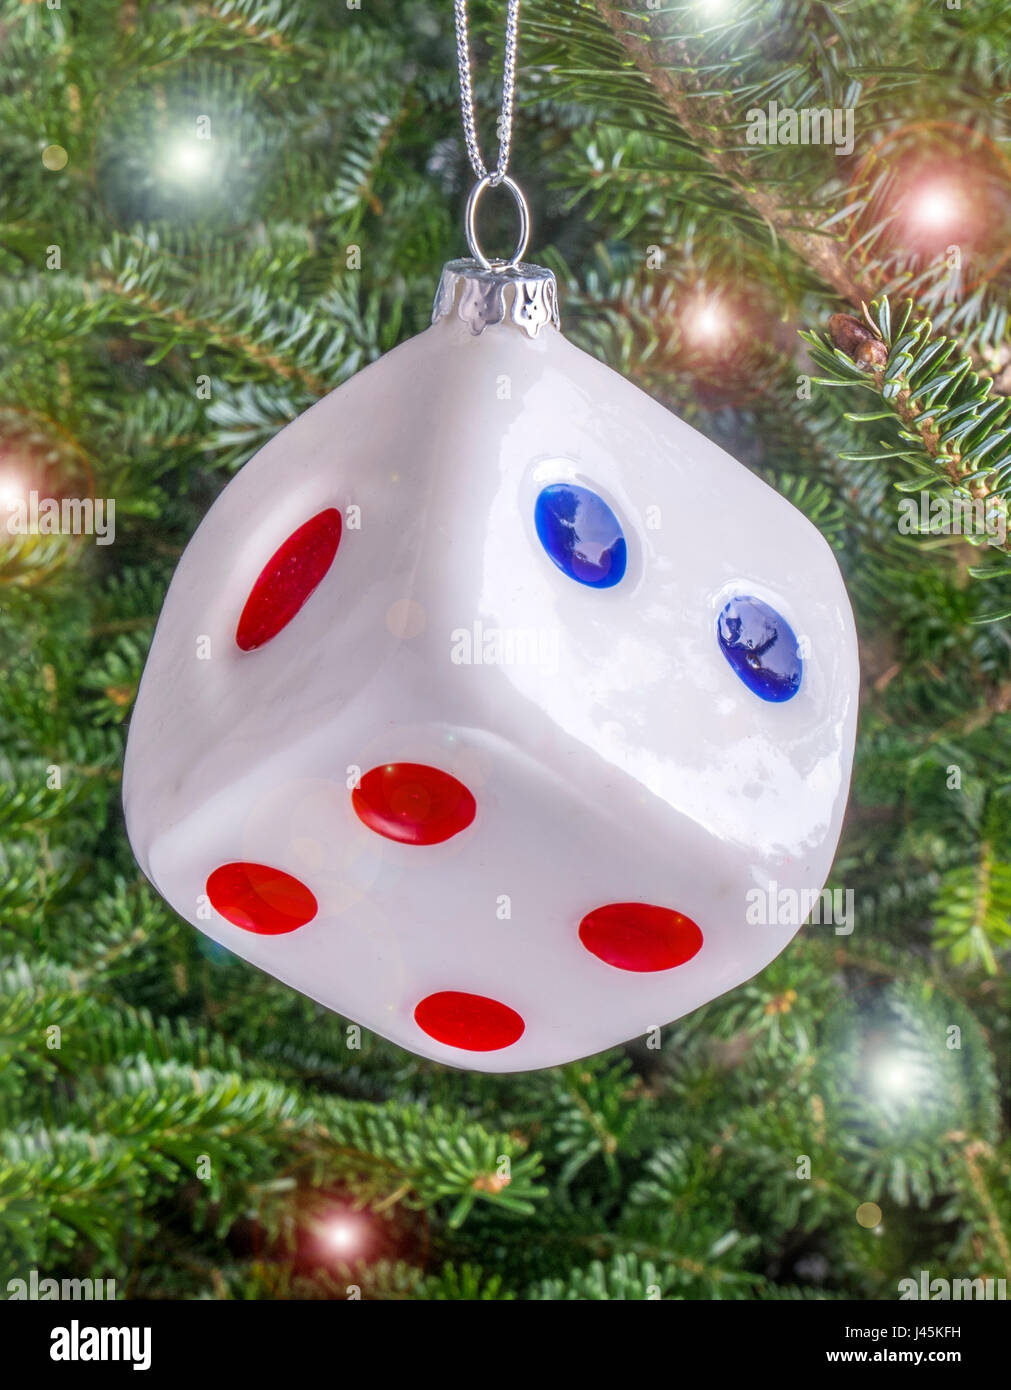 Christmas bauble hanging from a tree in the shape of a Dice Stock Photo